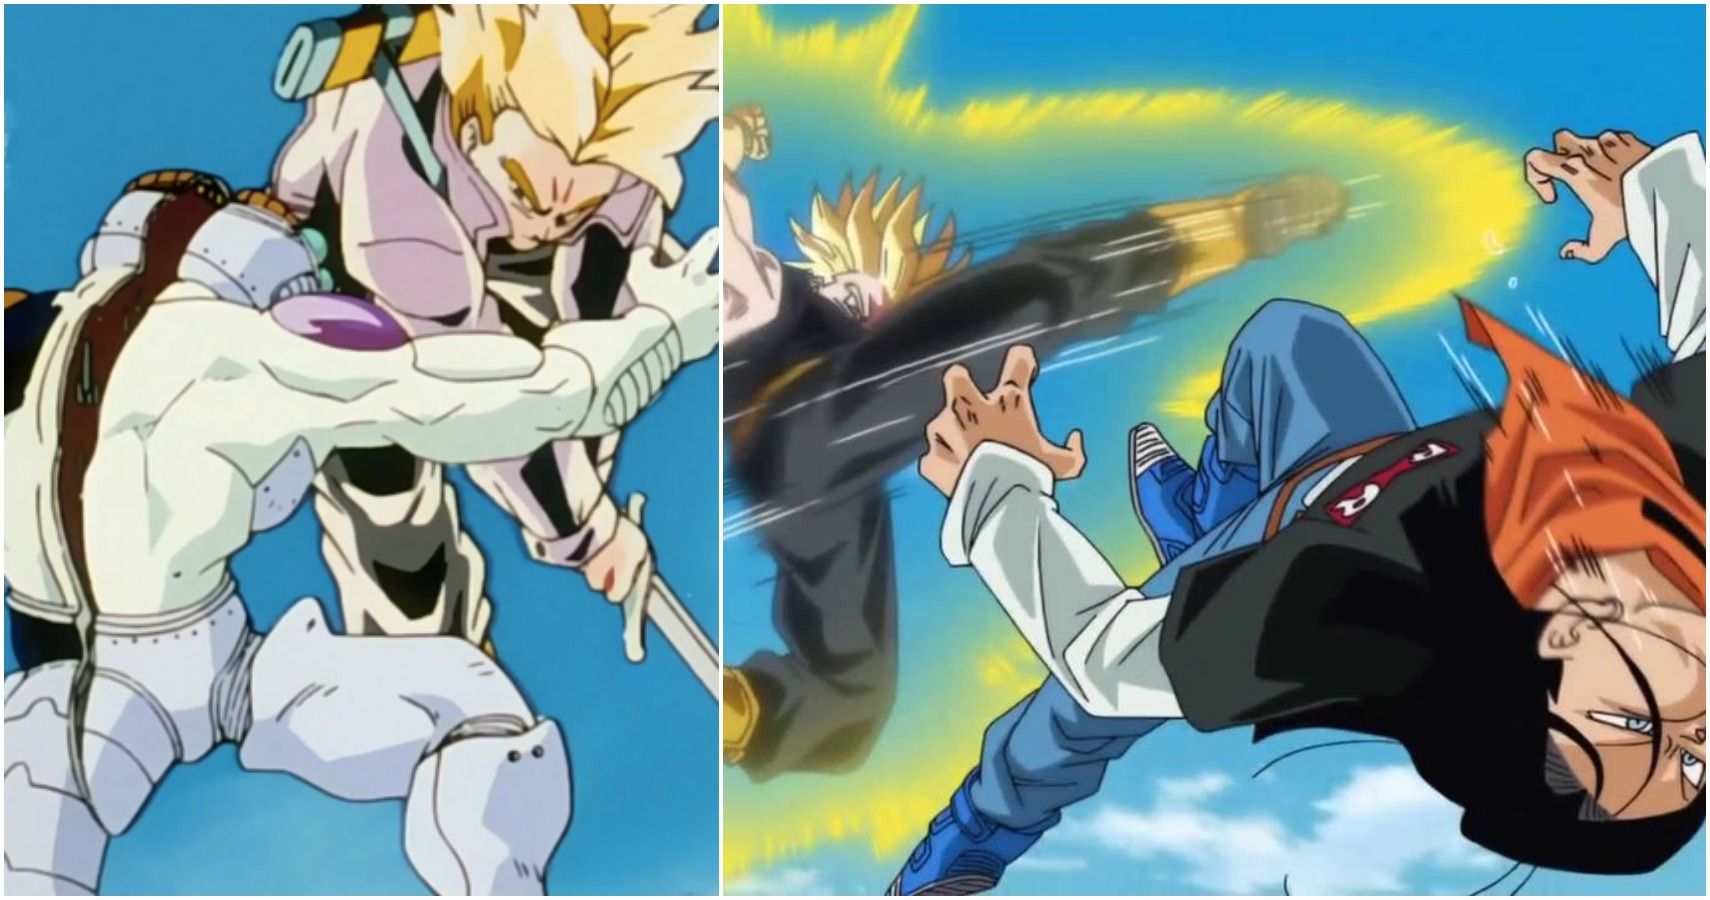 Trunks - Dragon Ball character - Androids future version